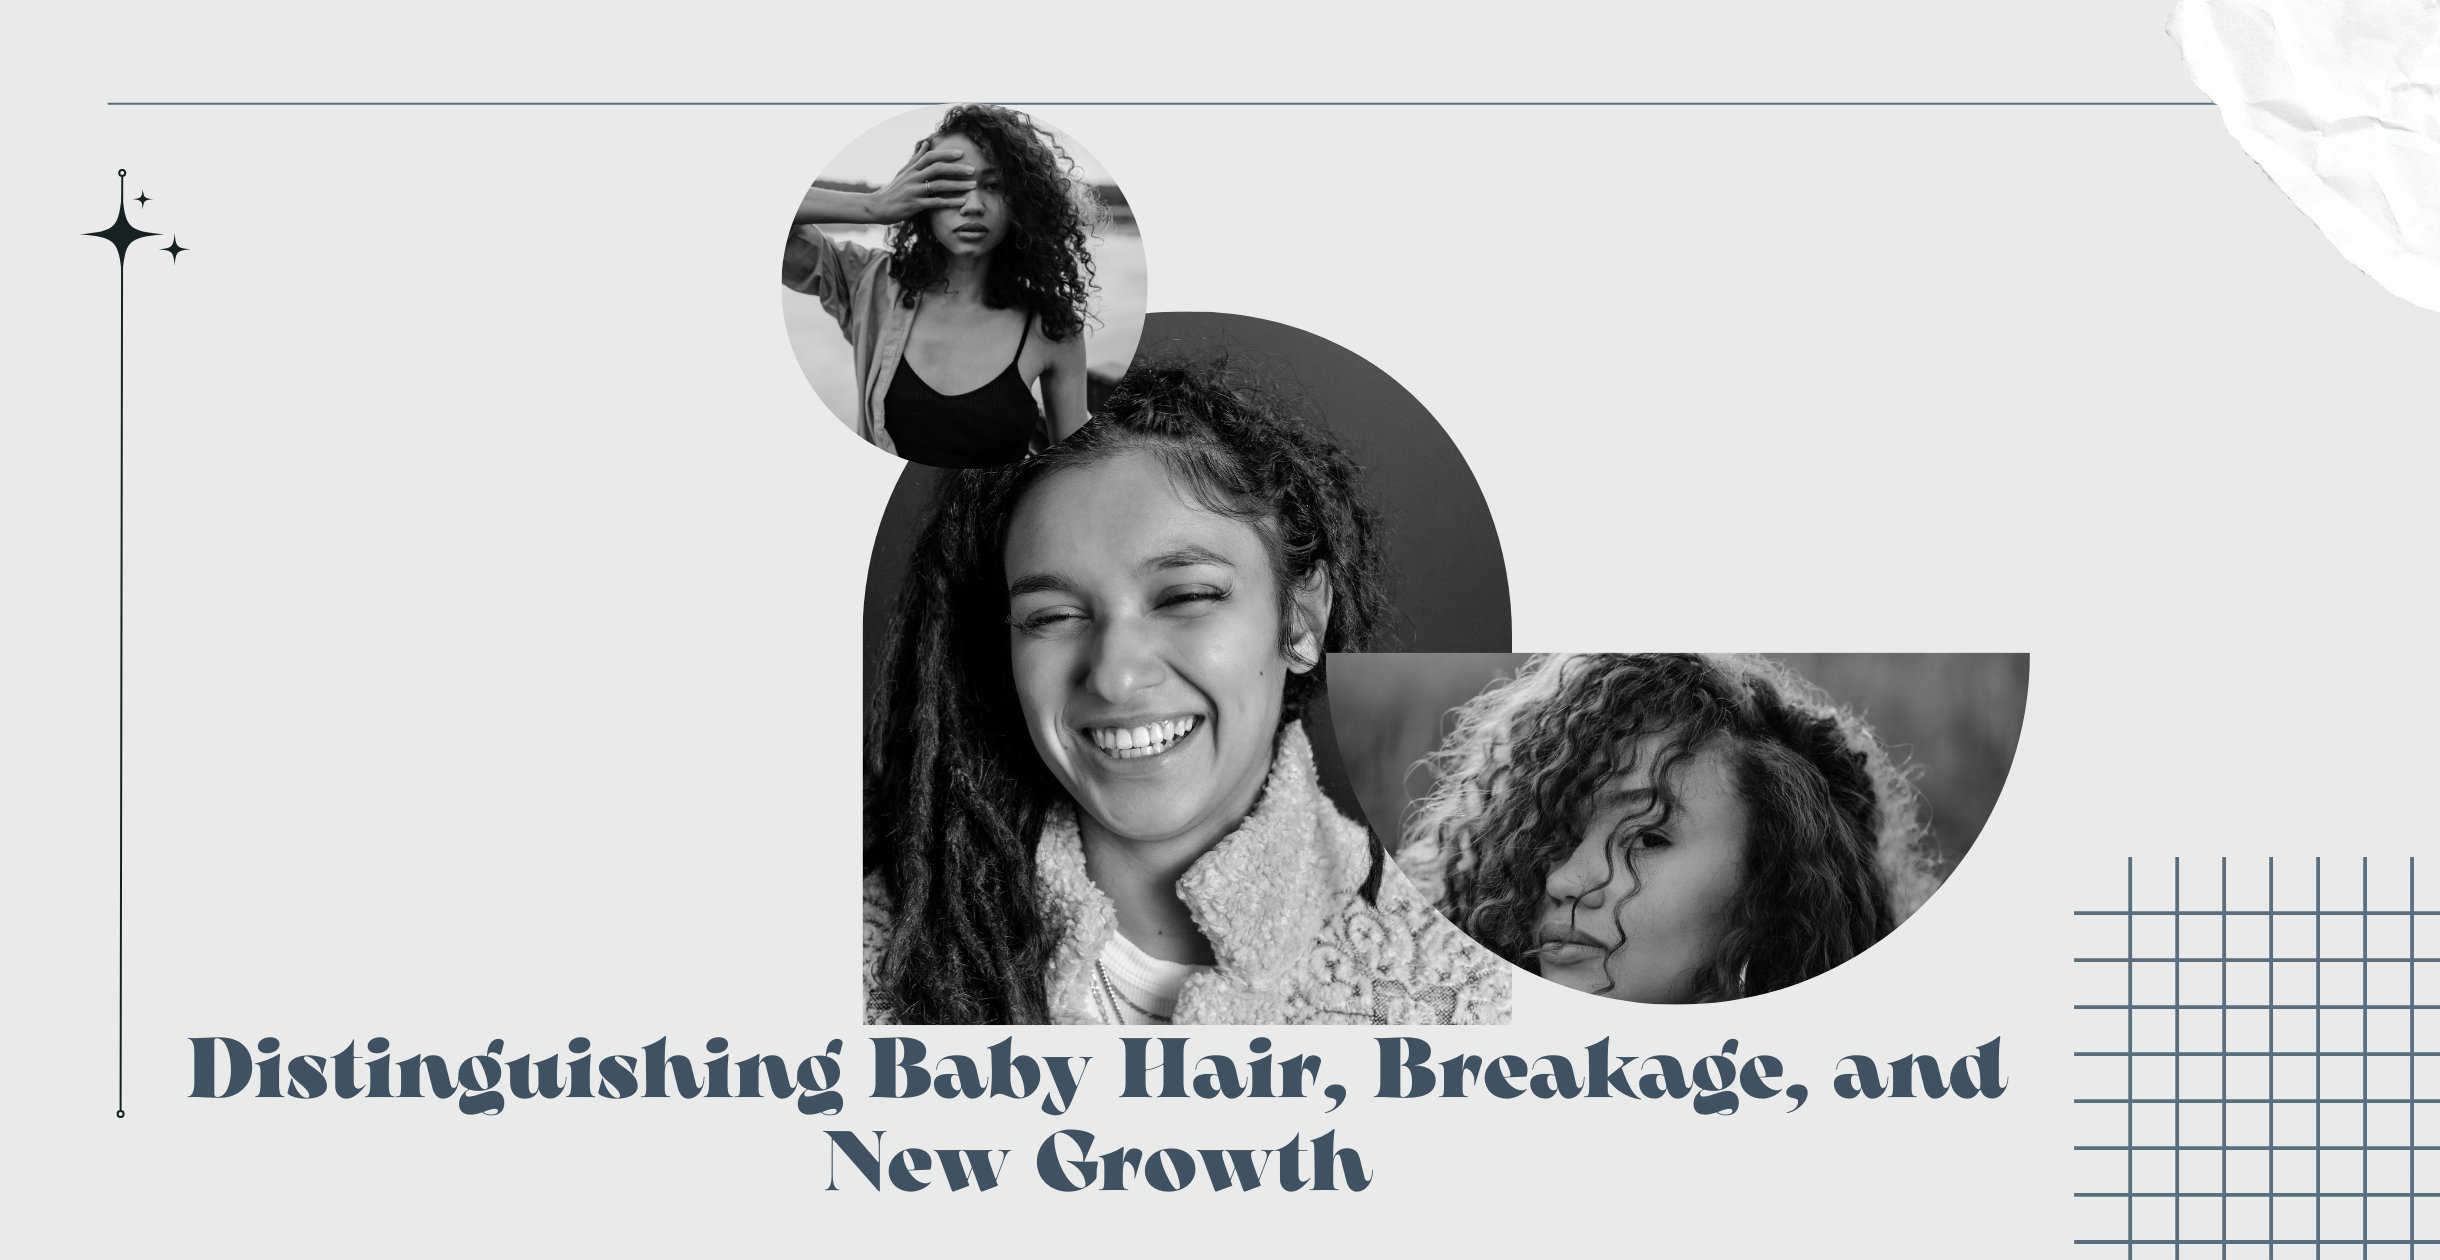 Understanding Your Hair: Distinguishing Baby Hair, Breakage, and New Growth